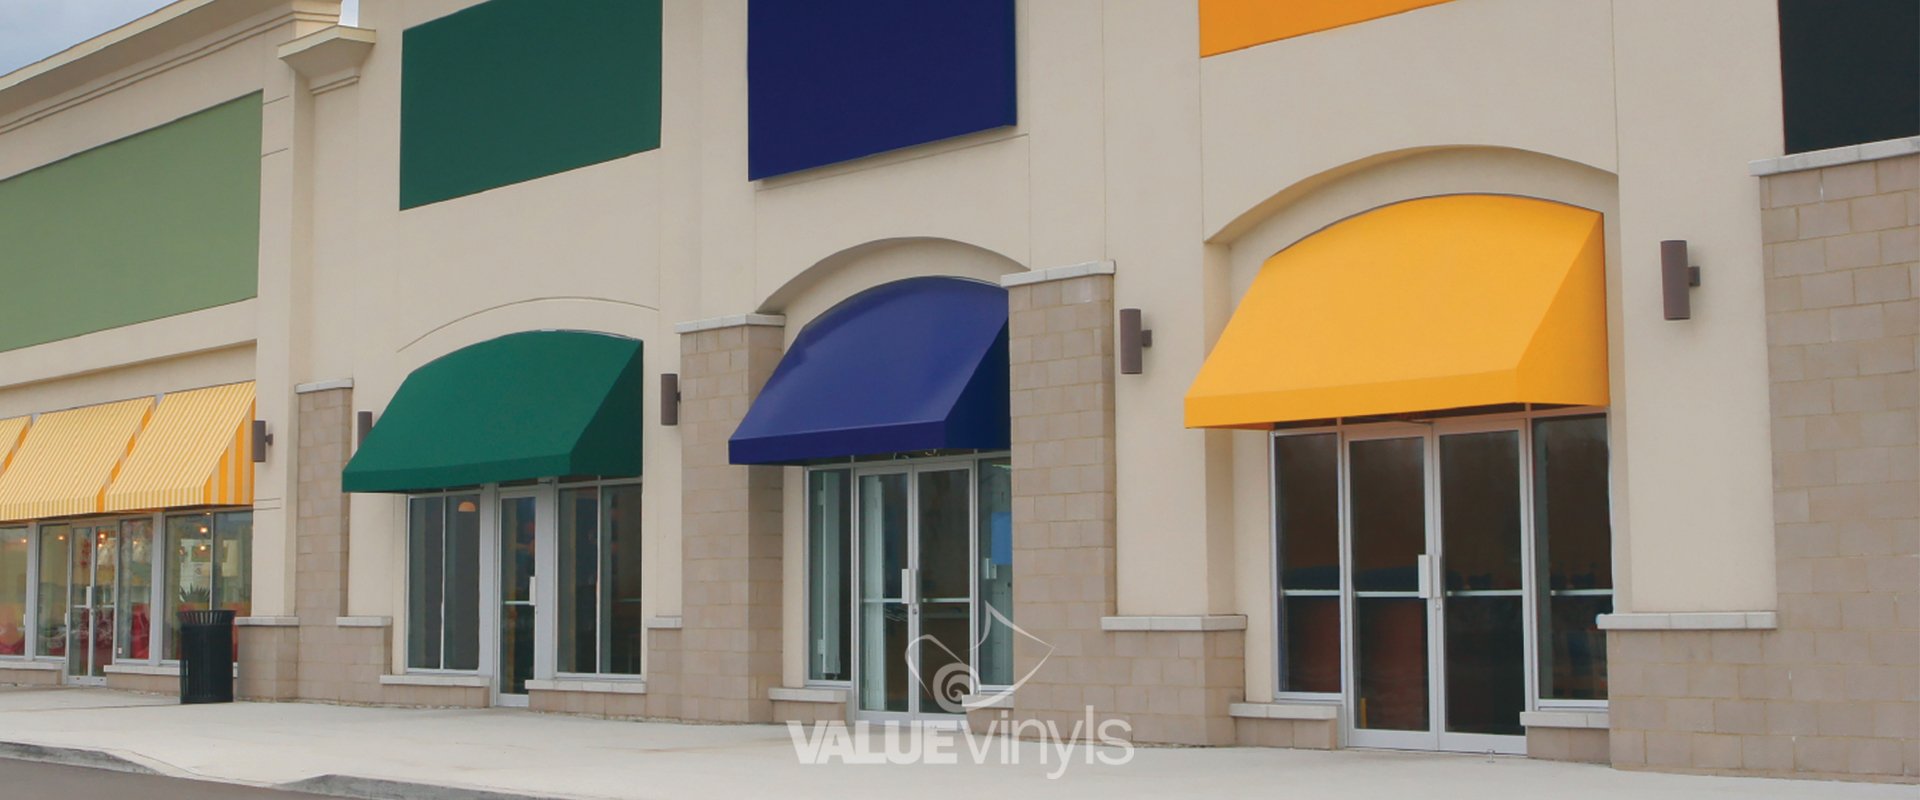 Pick Soluna Vinyl for Better Durability Over Standard Acrylic Fabrics! What Is Better Vinyl Or Acrylic Awning